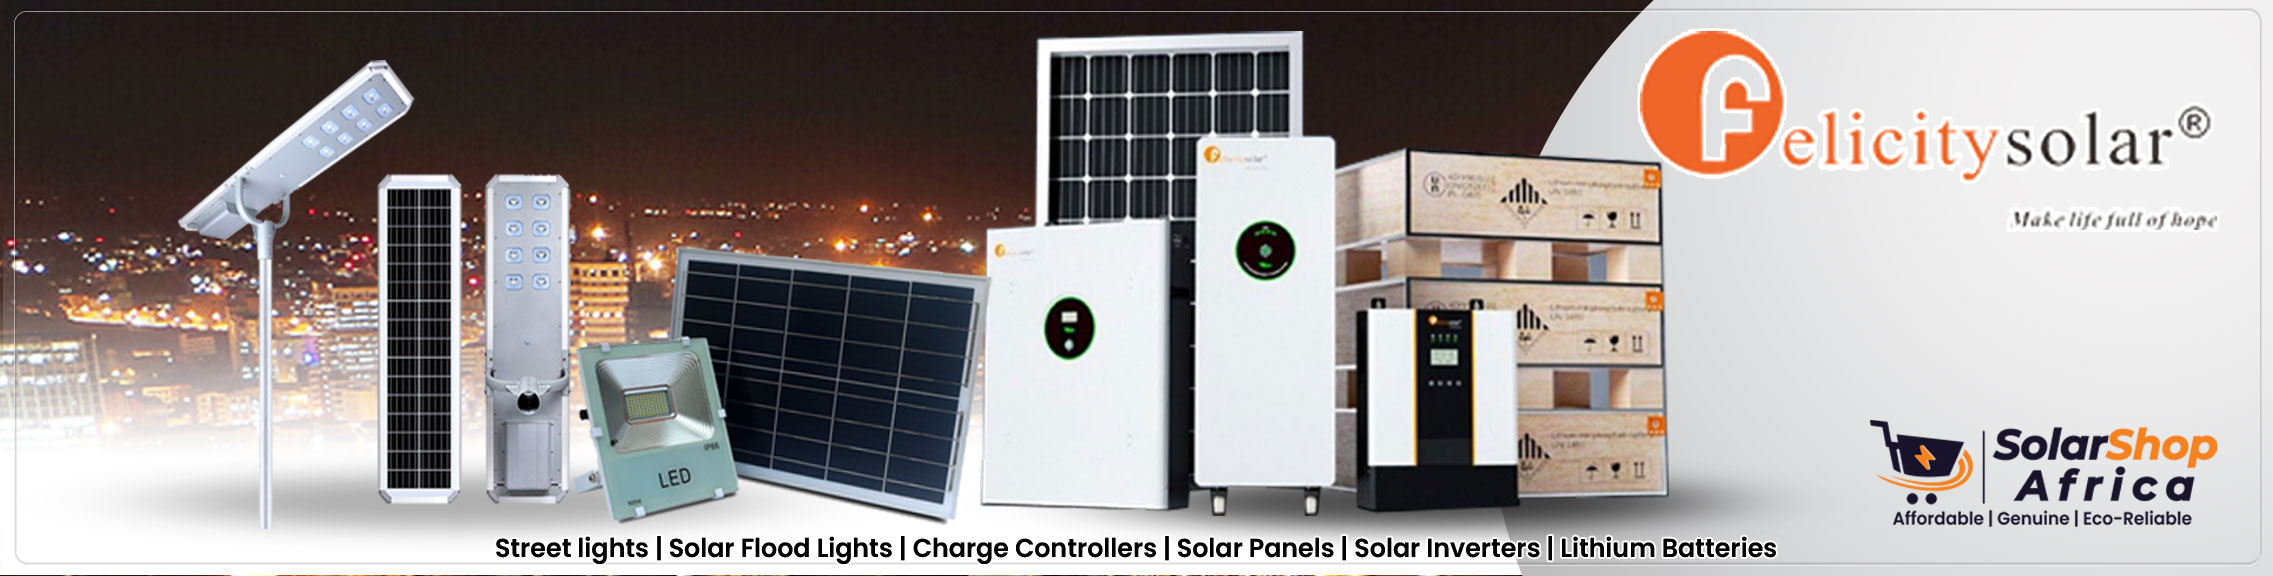 Felicity Solar products best prices in Kenya SolarShop Africa